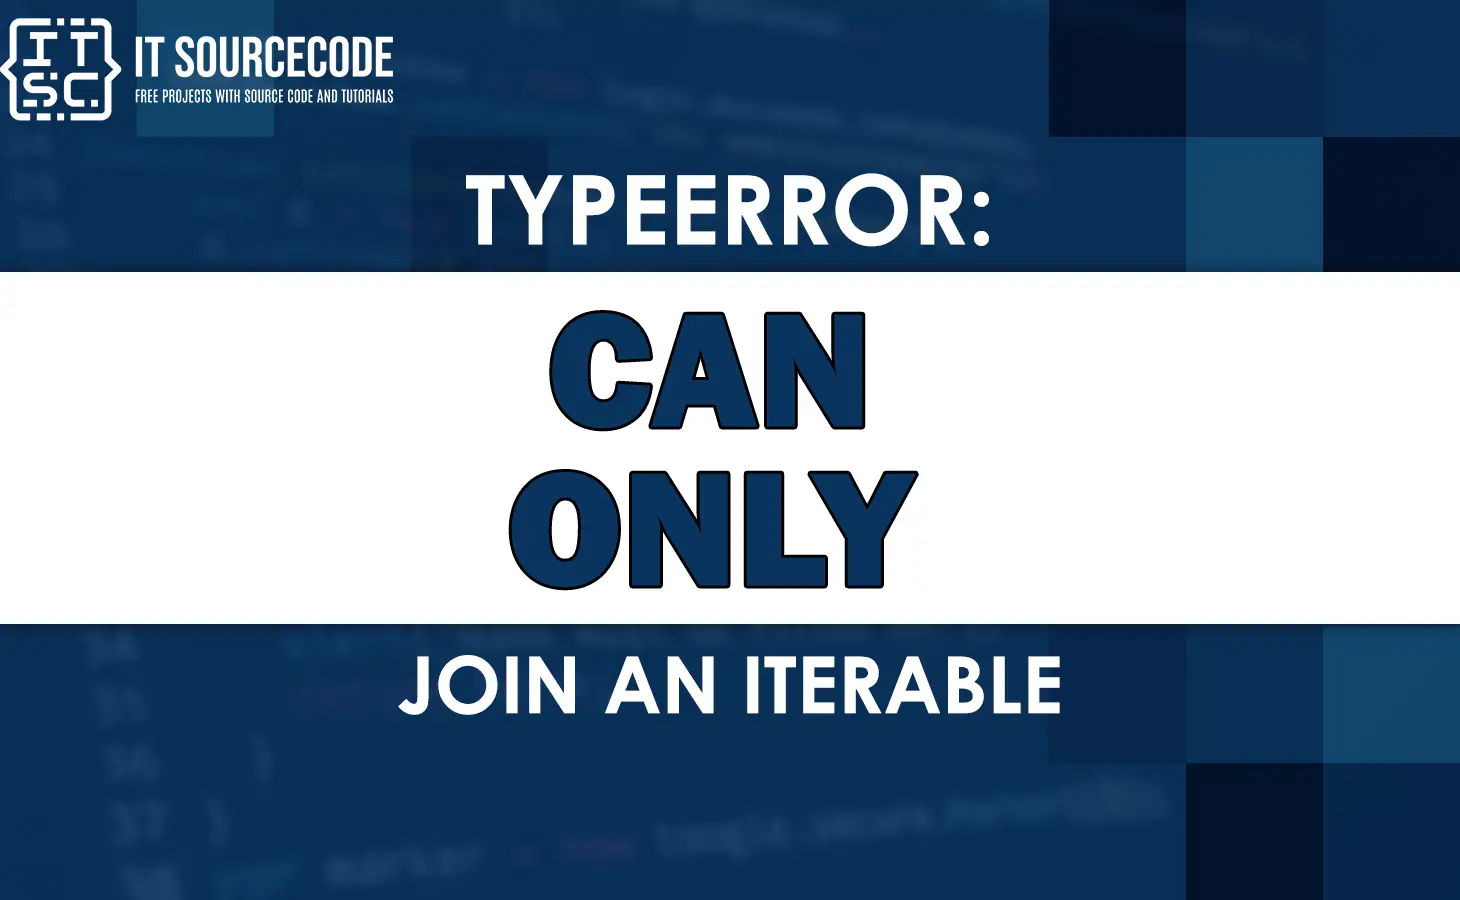 Typeerror can only join an iterable